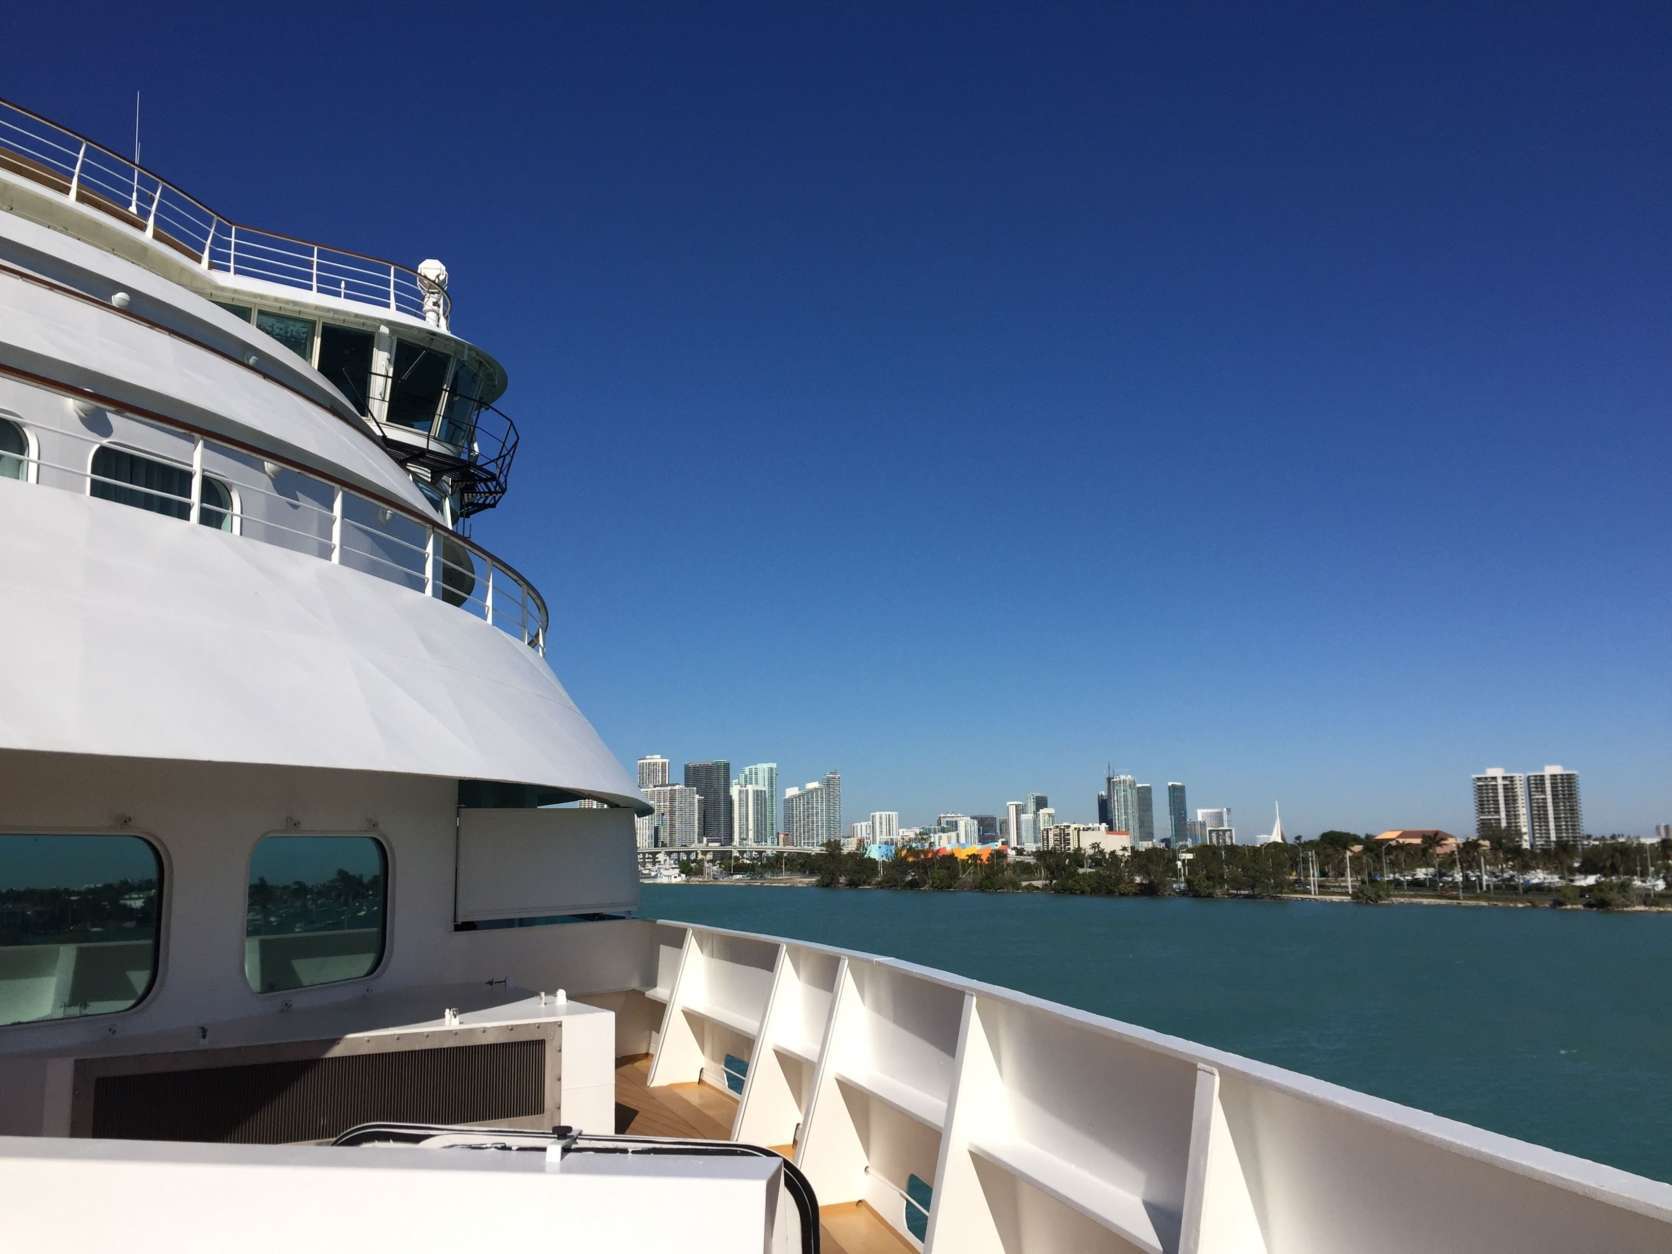 This Jan. 4, 2018 photo shows a view from the deck of the Seabourn Sojourn cruise ship in the port of Miami. A panel of cruise experts from CruiseCritic.com, the Miami Herald and the Cruise Lines International Association gathered on the Sojourn in a forum moderated by The Associated Press to discuss issues and trends in the cruise industry with a live audience of cruise passengers. (AP Photo/Beth J. Harpaz)